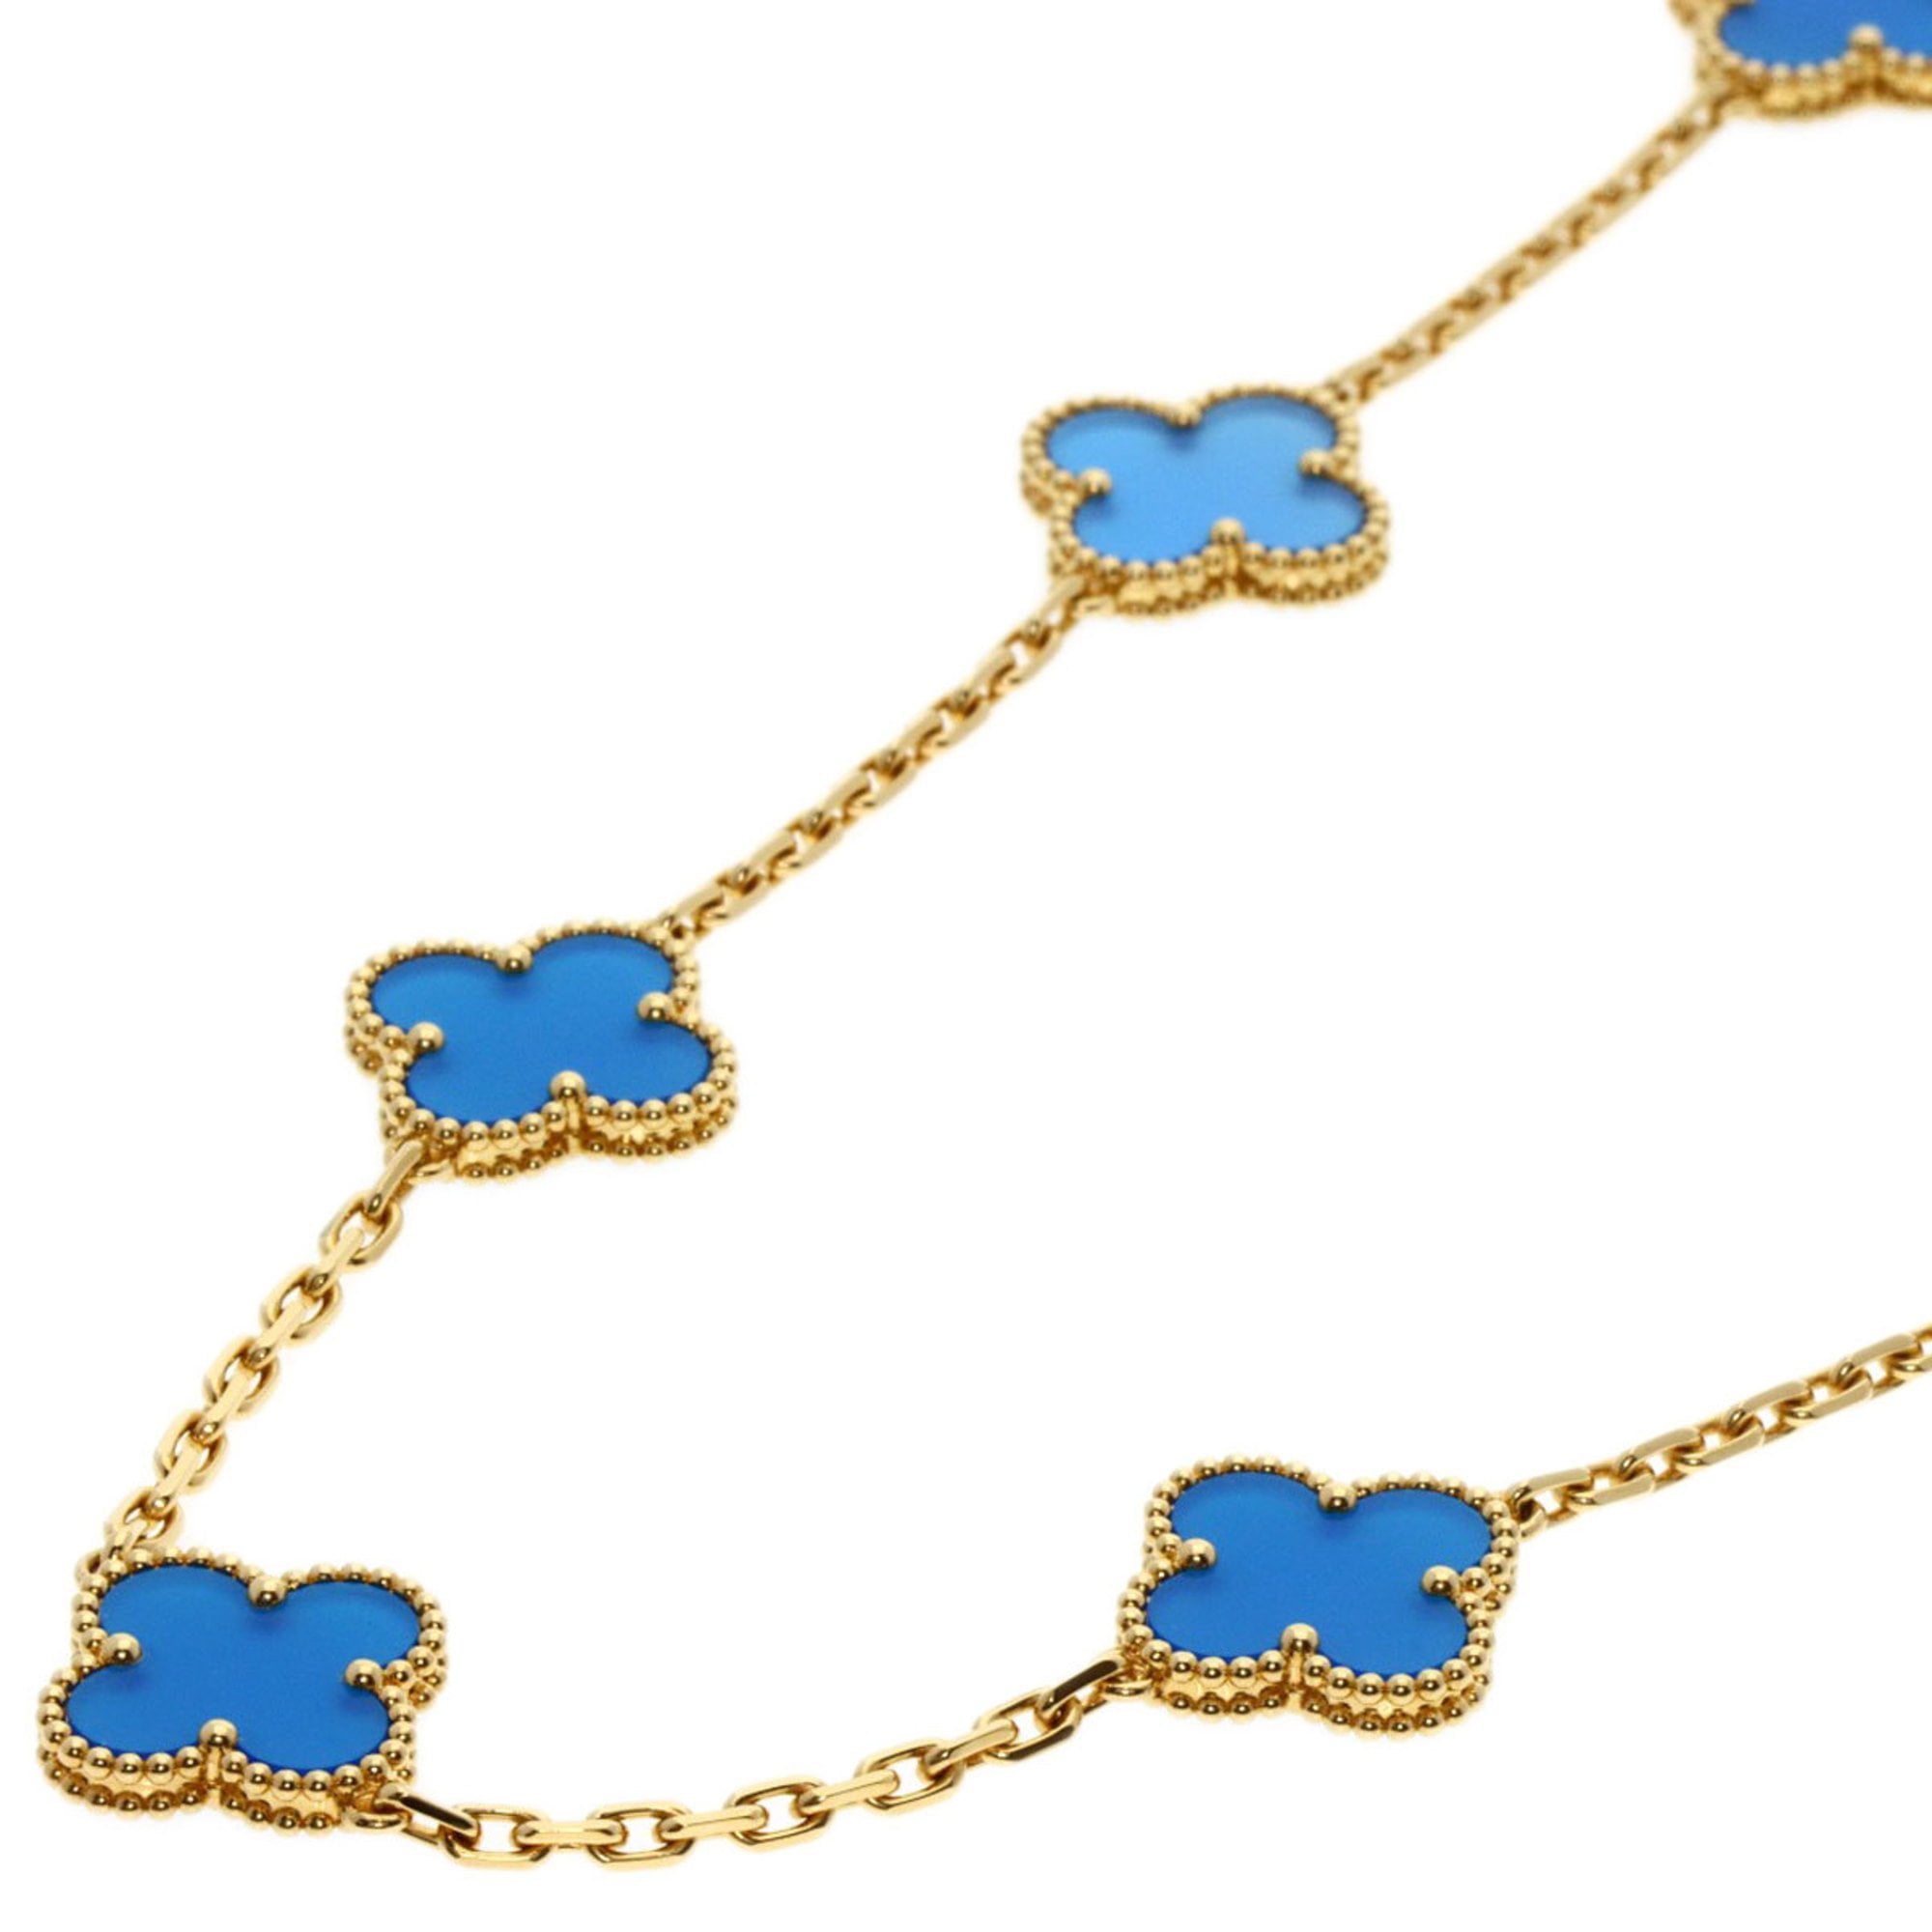 Luxury Designer Van Clover Black Clover Necklace With Four Leaf Clover Cleef  Flowers Fashionable Womens Jewelry From Picril1999, $6.76 | DHgate.Com